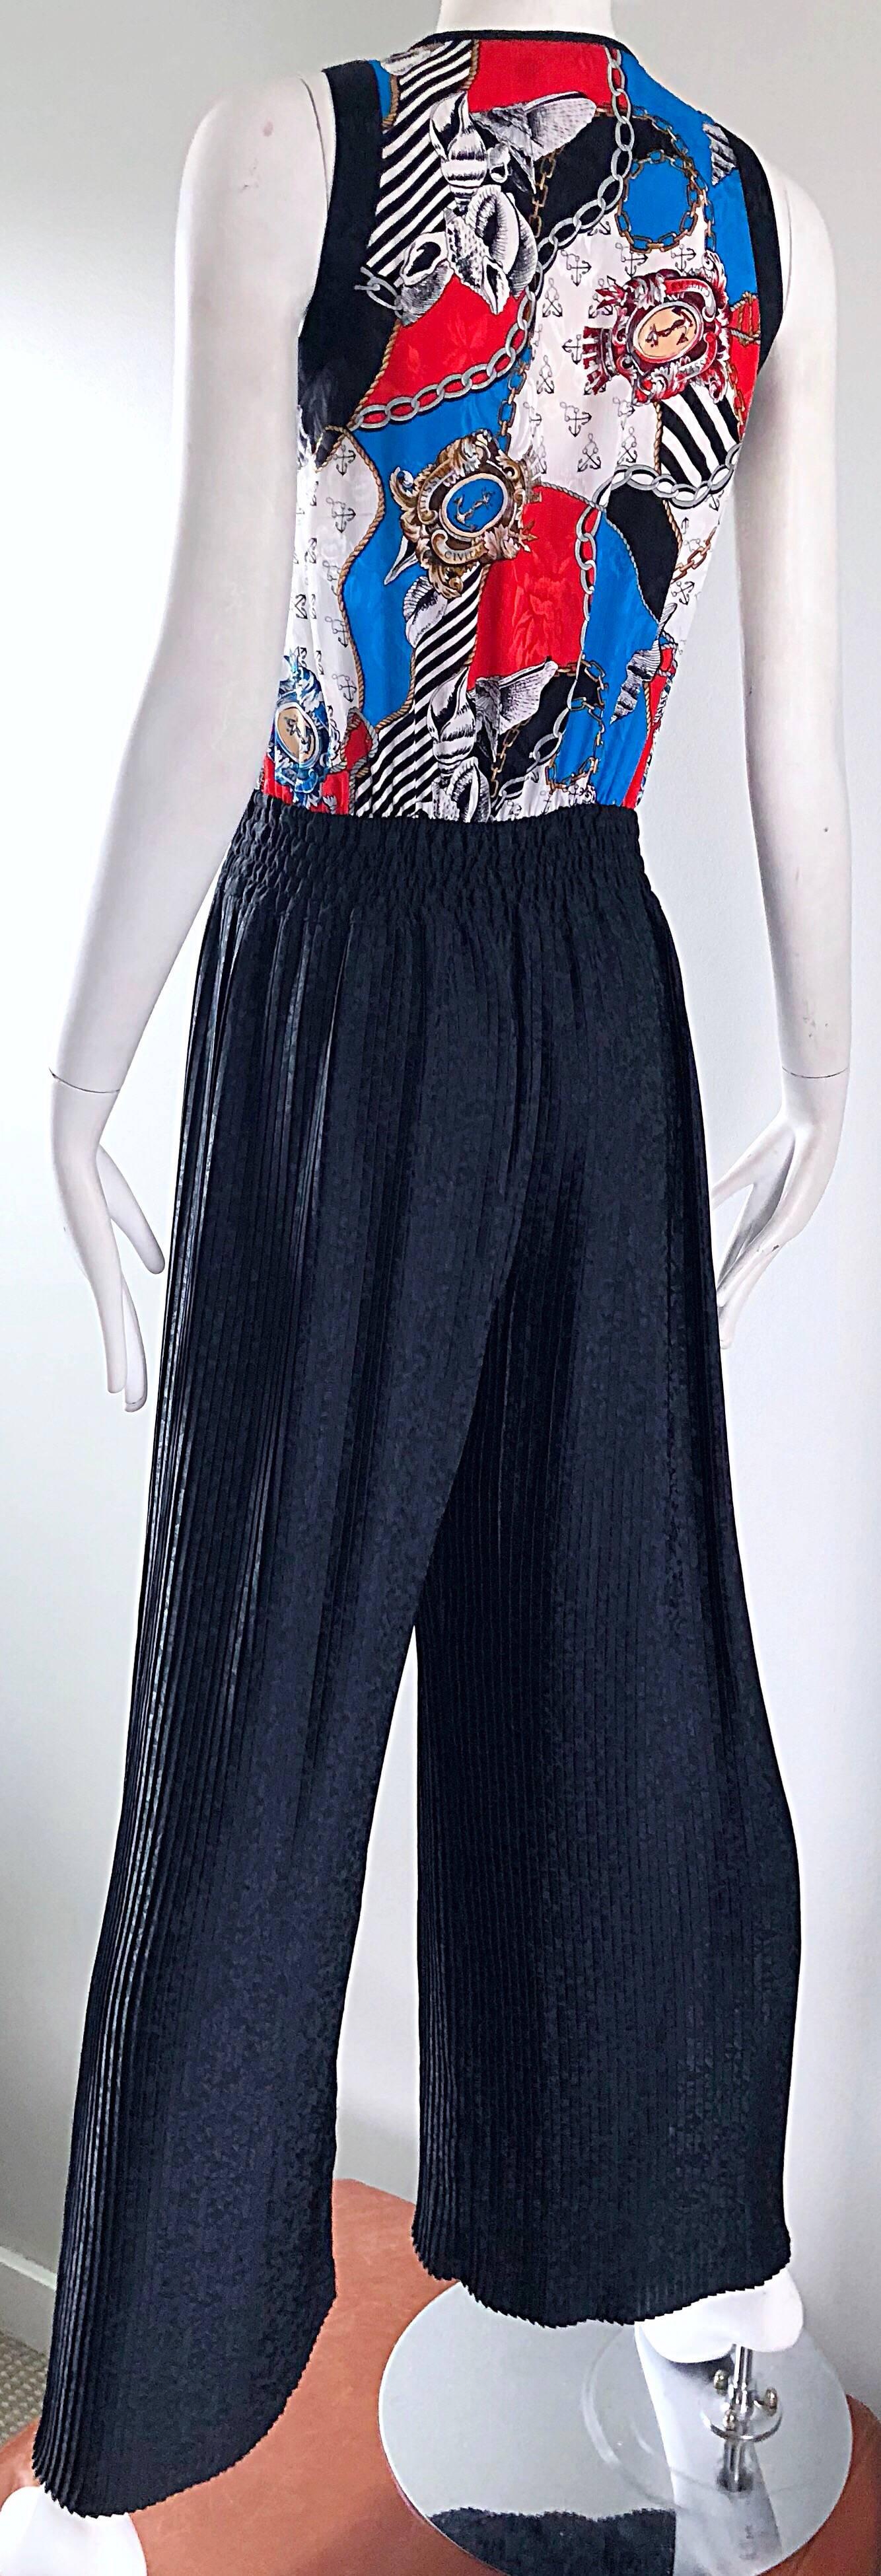 Diane Freis Vintage Nautical Wide Leg Palazzo Jumpsuit And Head Scarf 2